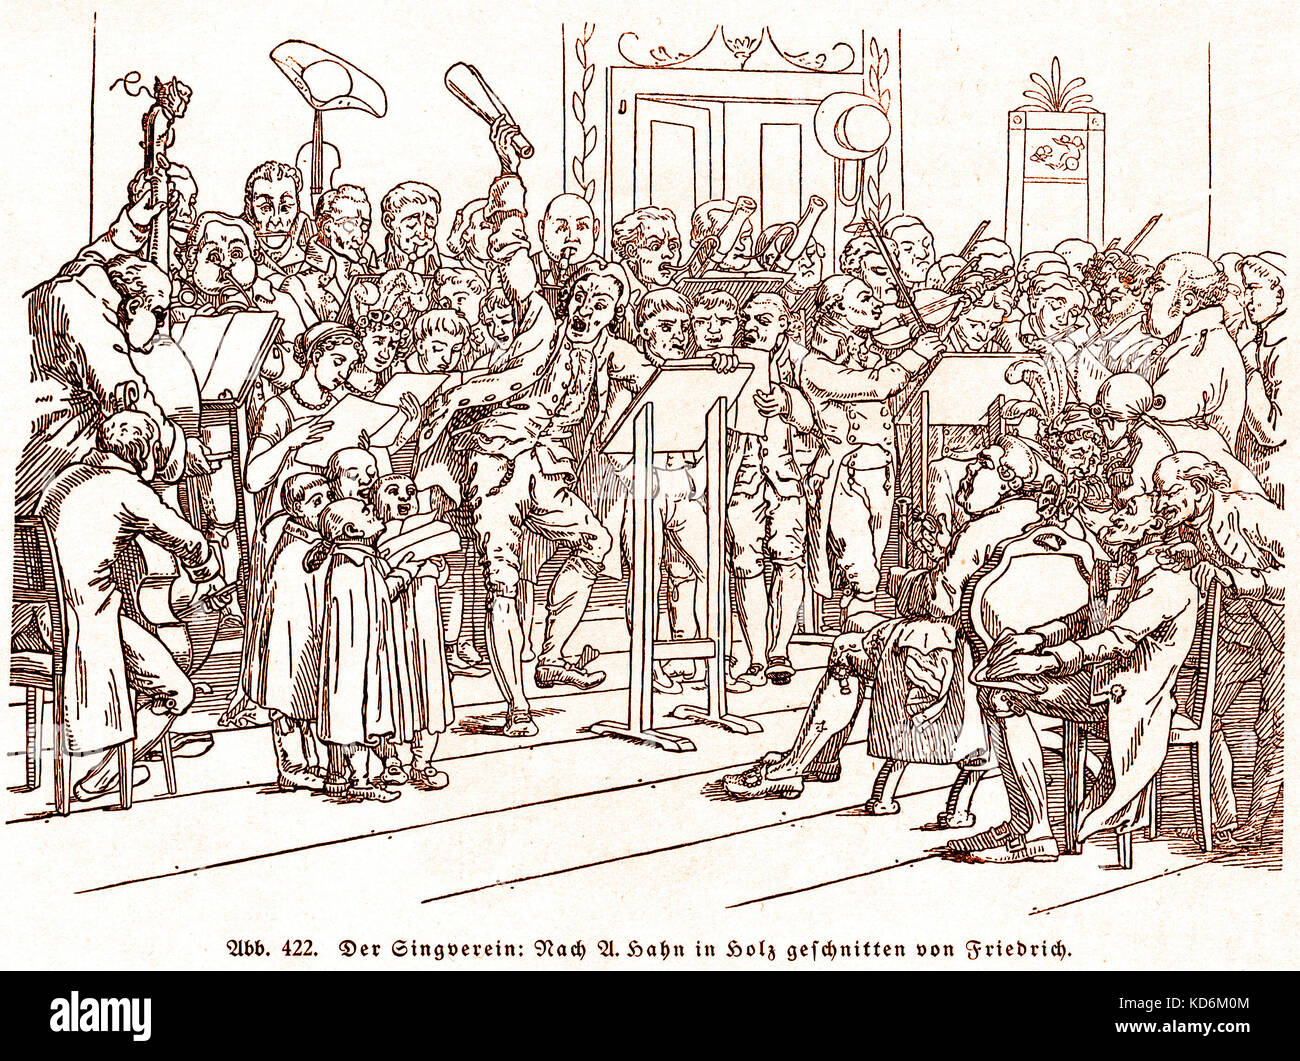 Der Singverein - Society of singers after  U. Hahn, woodcut by Friedrich.  Violinists and choral singers.  18 th century costume.  Mozart connection.  German.  Germany. Violinists Stock Photo